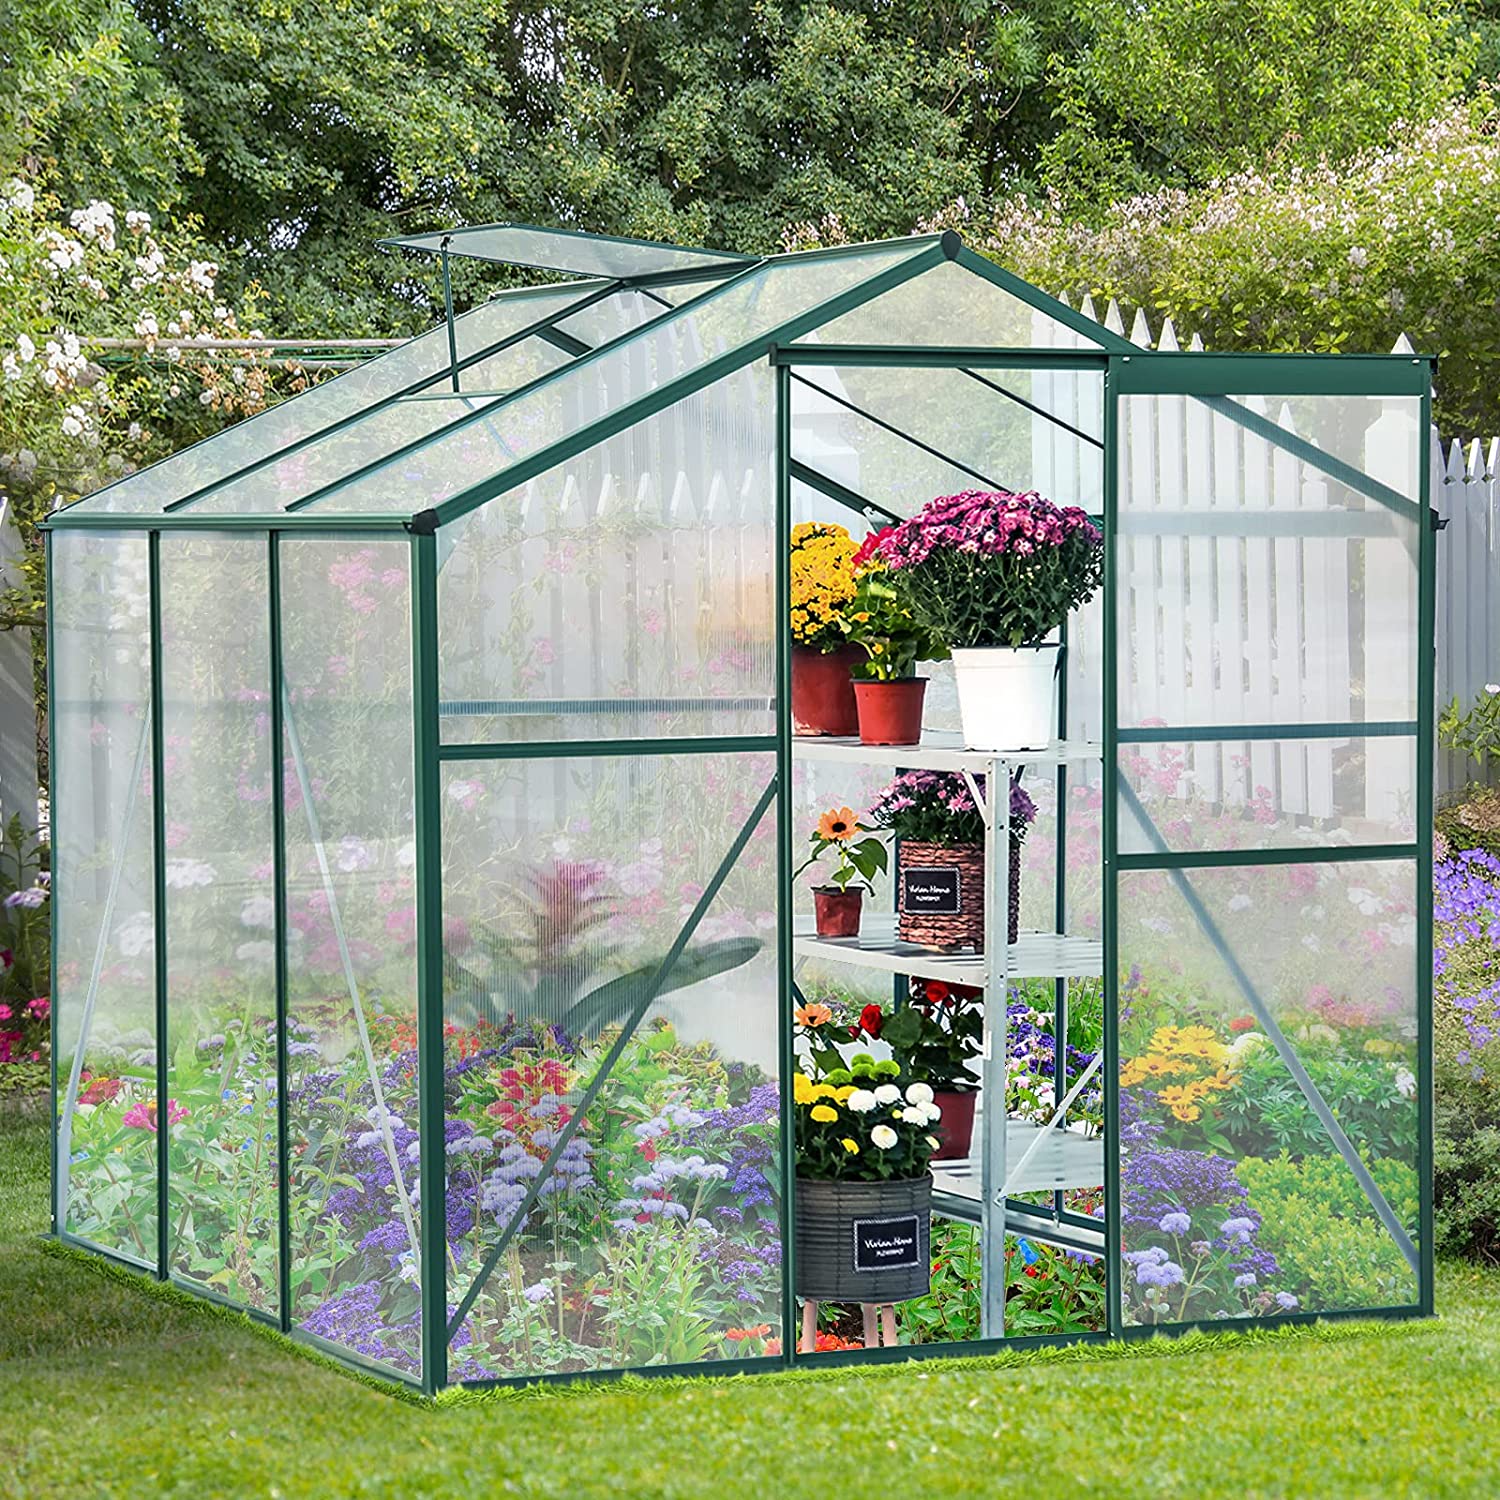 Review of U-MAX Polycarbonate Outdoor Greenhouse 6'(L) x6'(W) x6.6'(H)